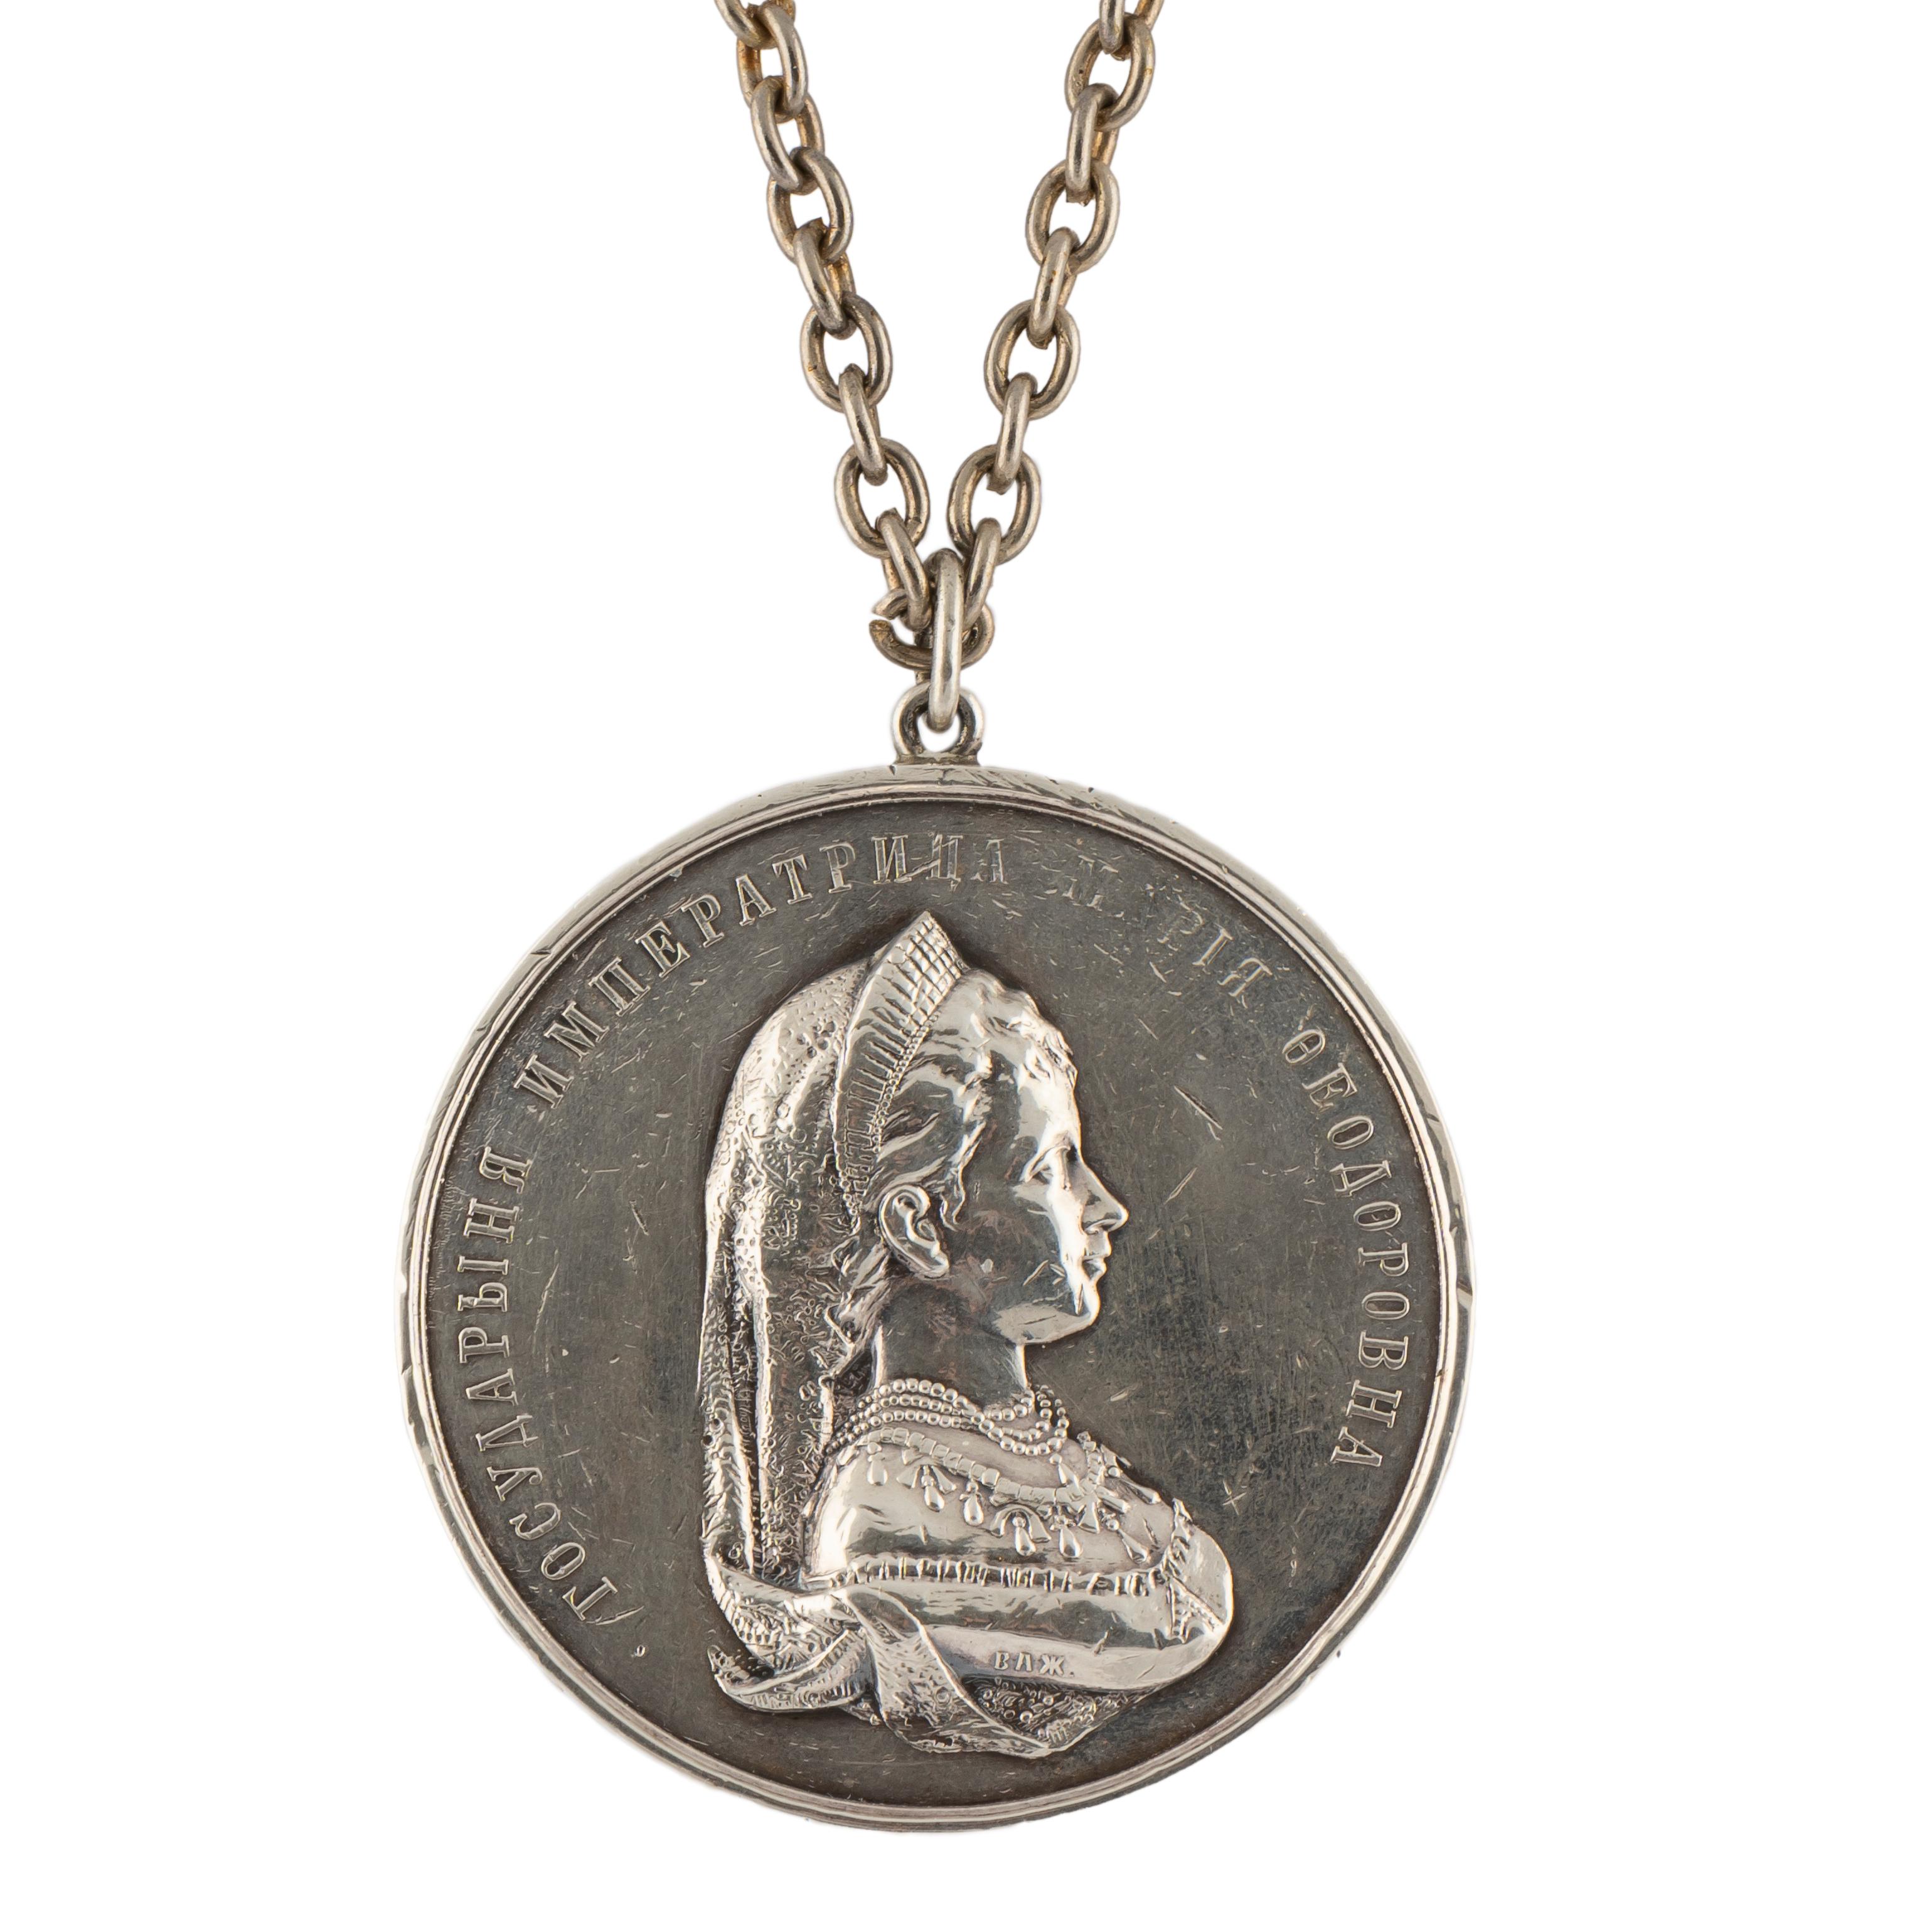 Beautiful solid silver medallion mounted as a pendant from the Romanov era, period of Alexander III, on one side is a portrait bust of Empress Maria Feodorovna (1847-1928), wife of the Russian Tsar. The other side depicts a figure standing with